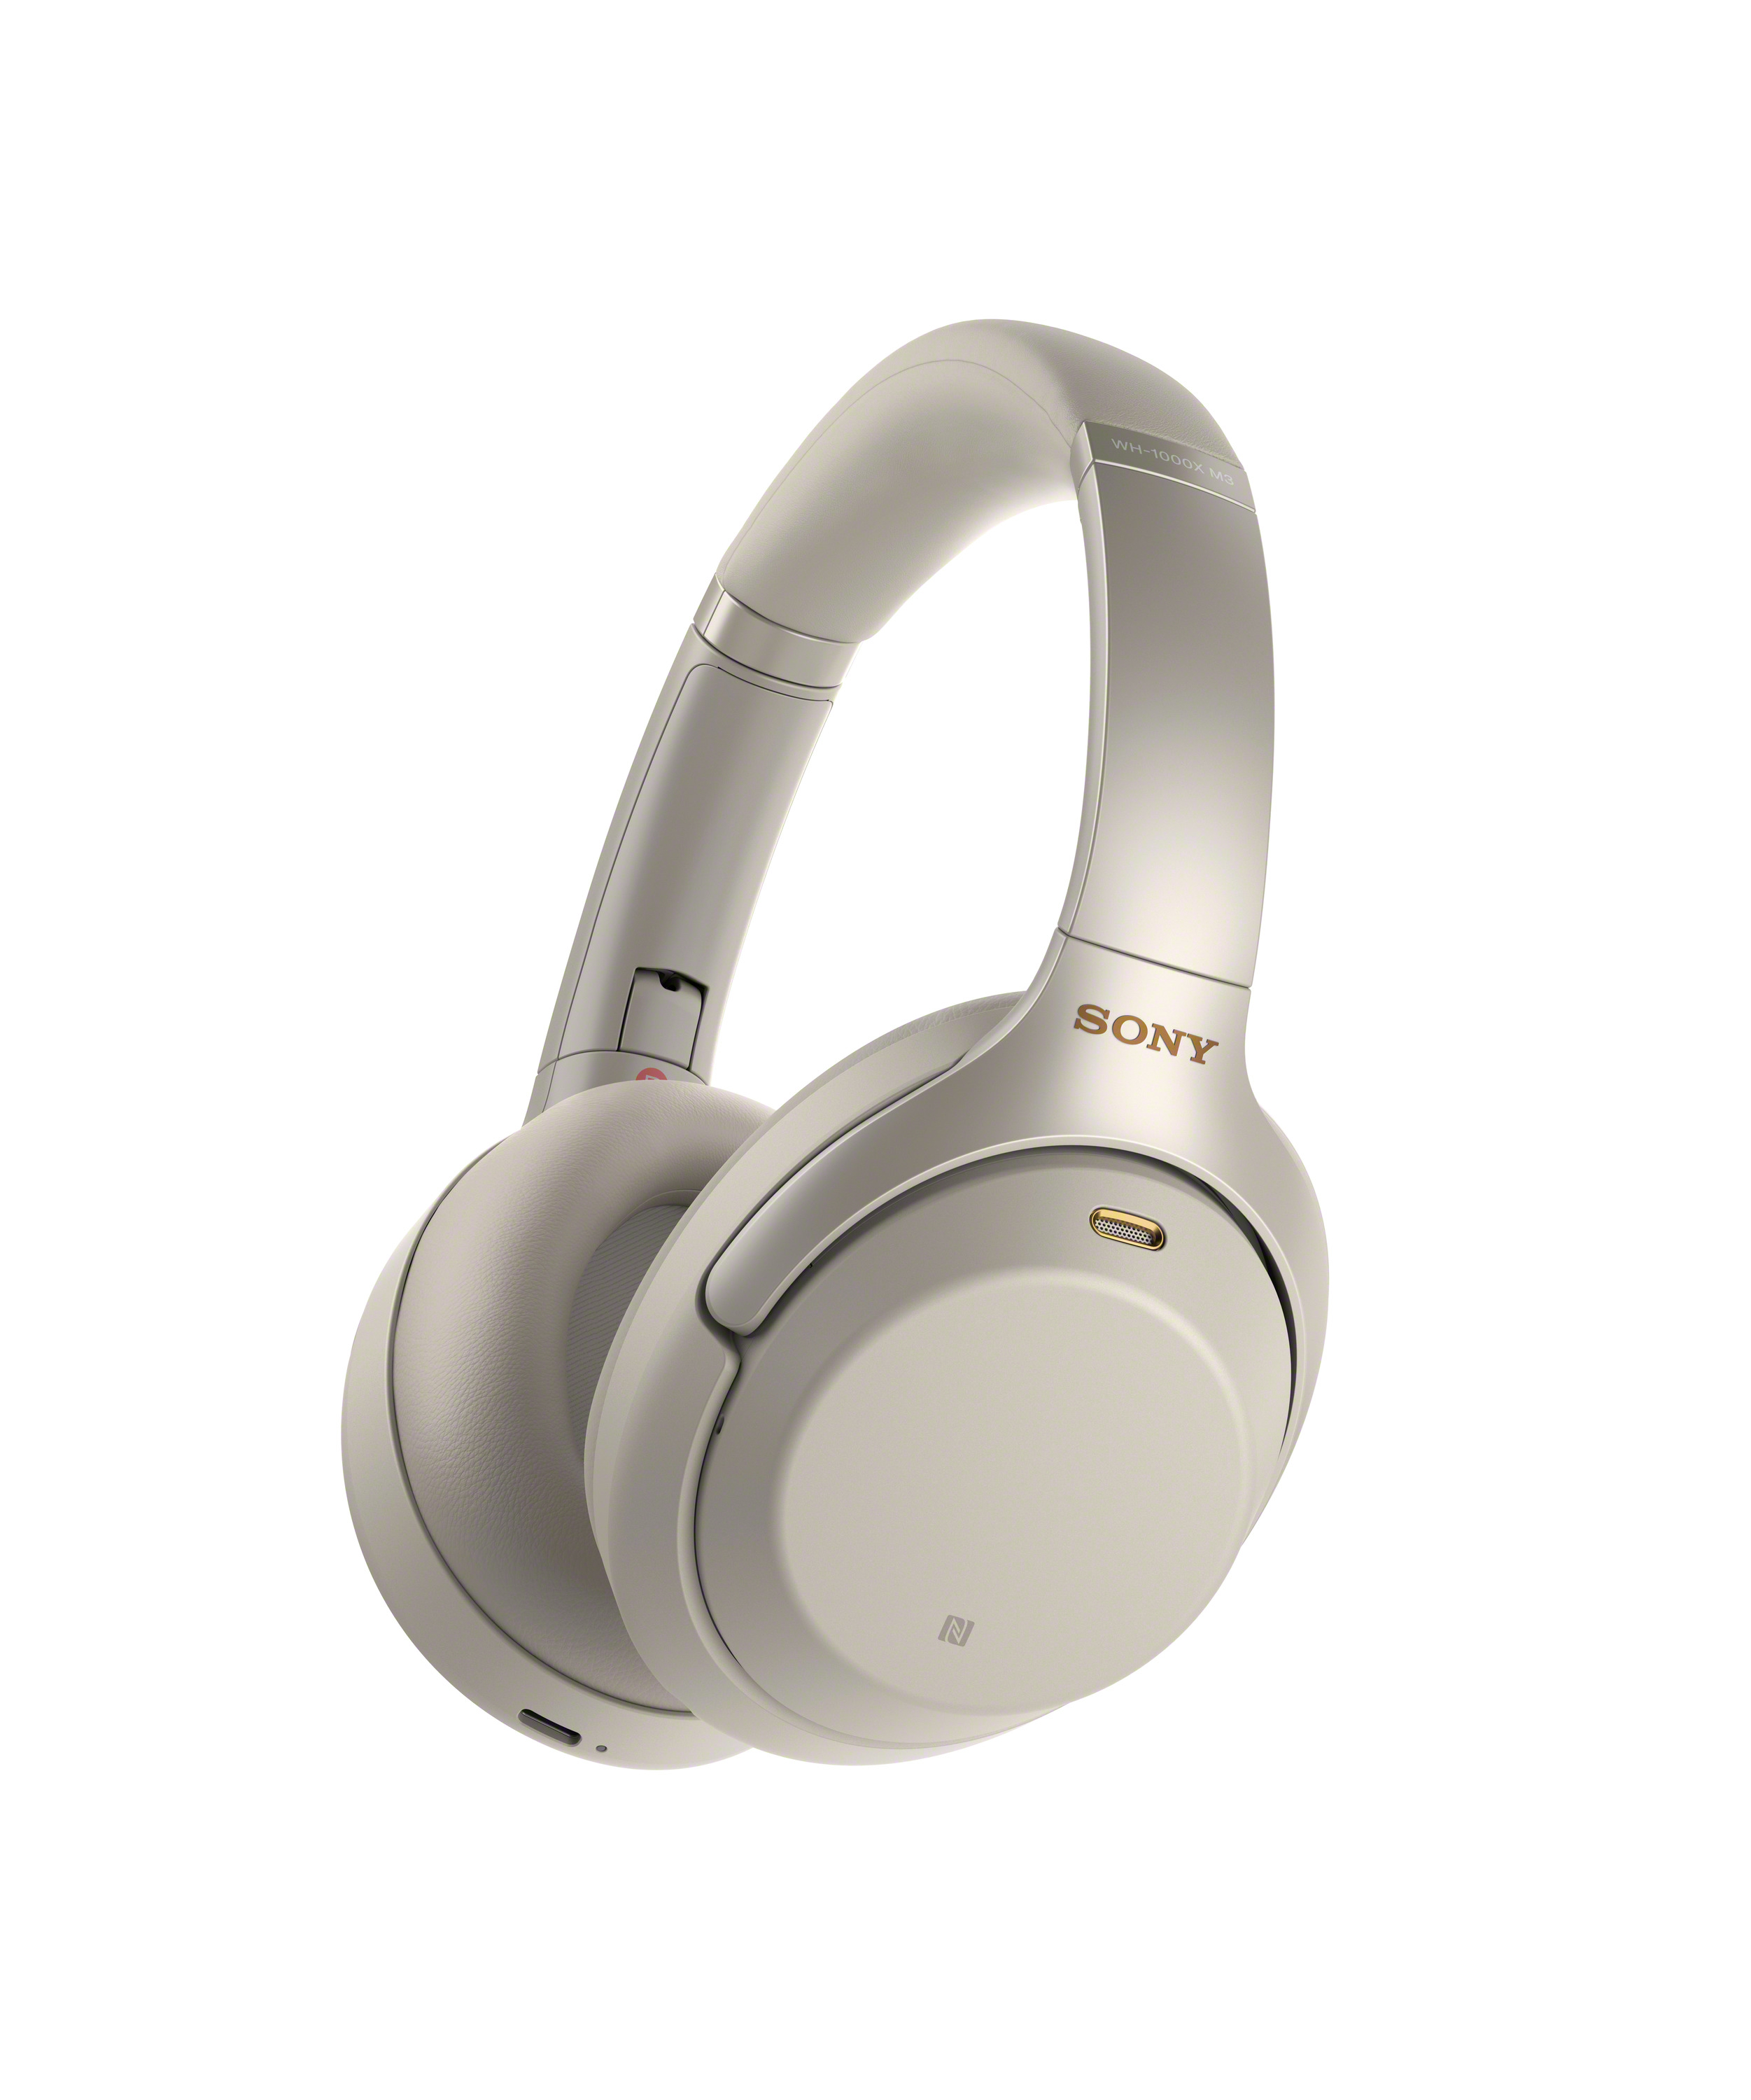 Details about Sony WH-1000XM3 Wireless Noise Canceling Over-Ear Headphones  w/ Google Assistant